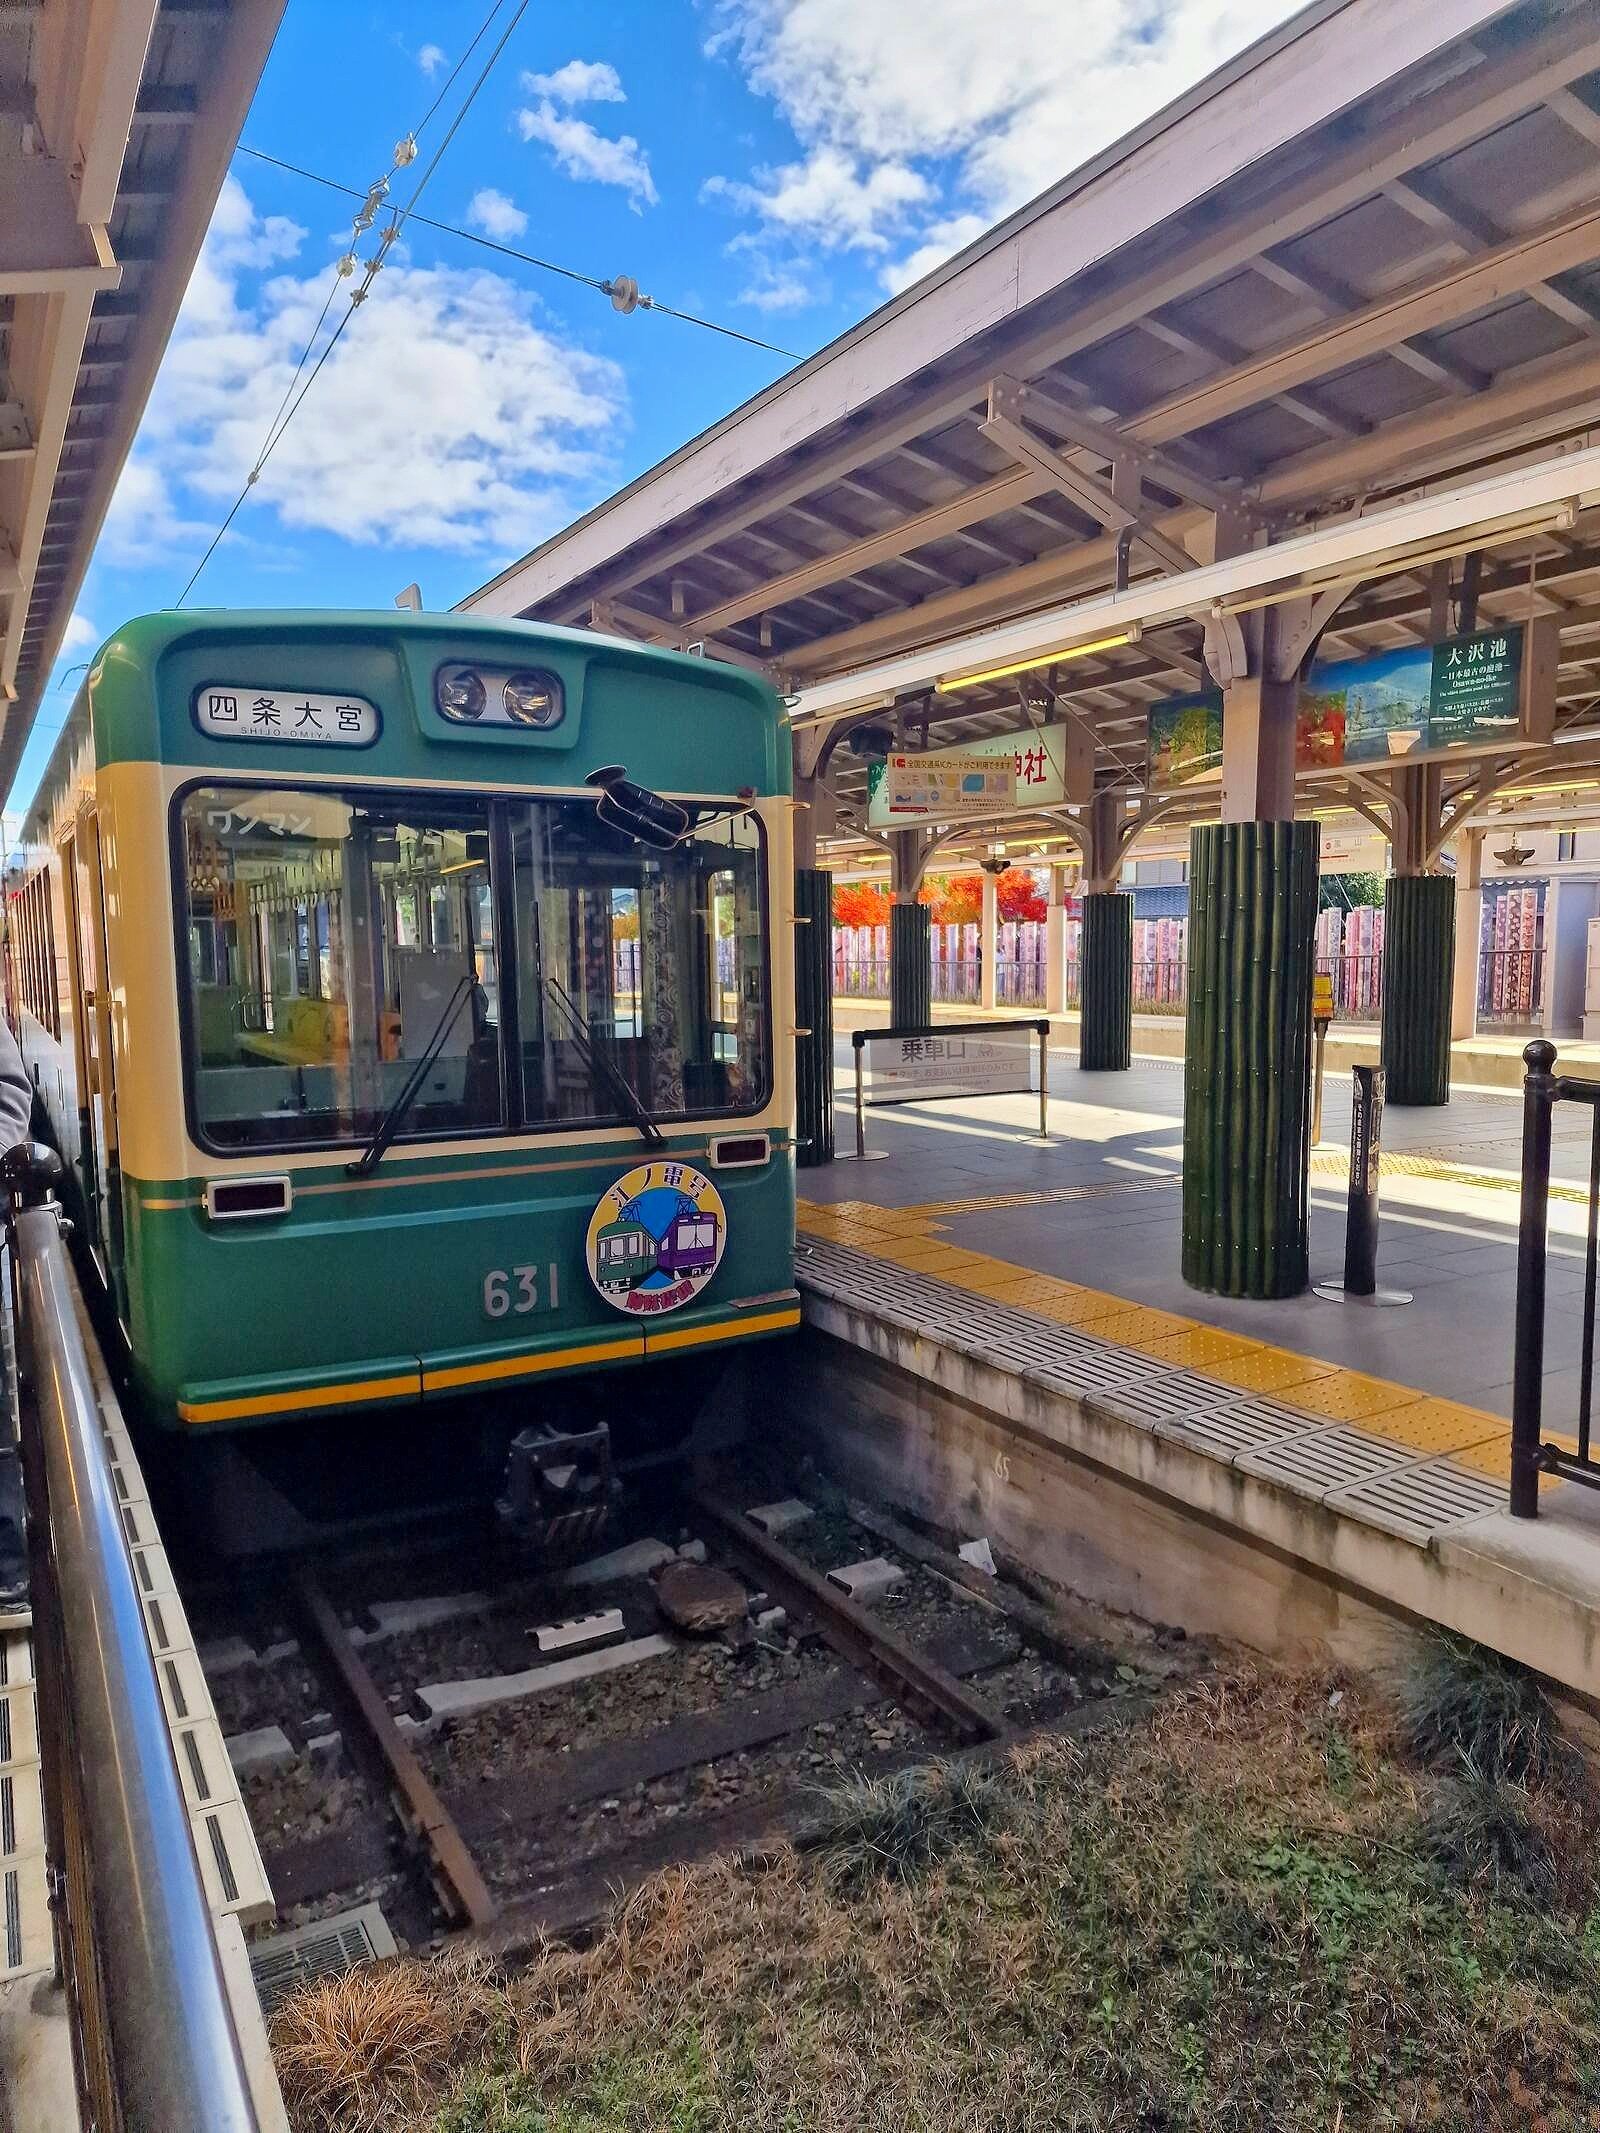 a flat-fronted train at the end of a line parked in a station, train is cream and green with a large window on the front